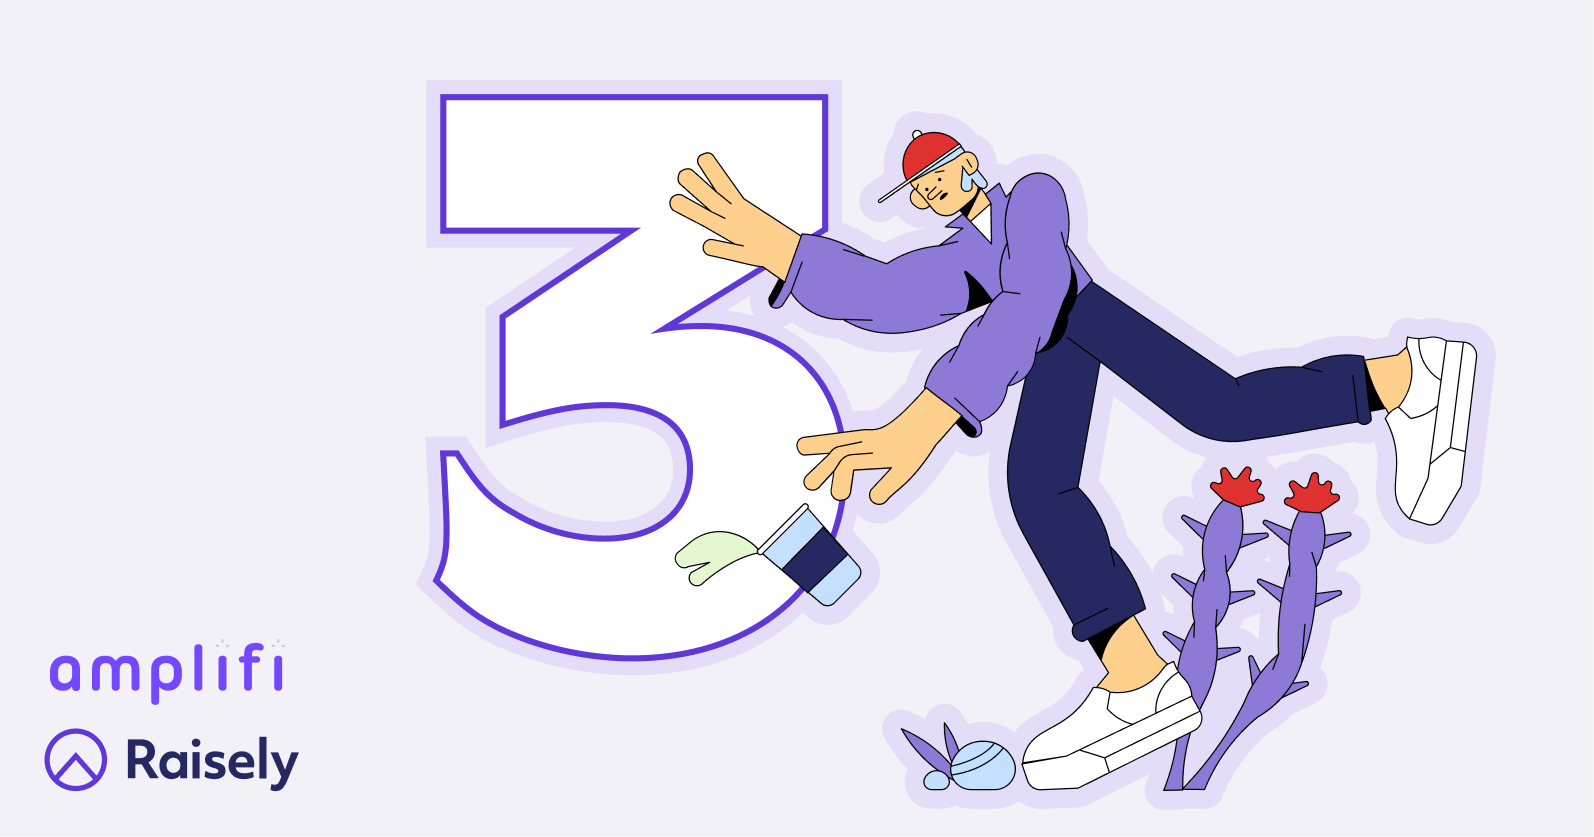 Illustration of a person tripping with a large number 3 in the background.